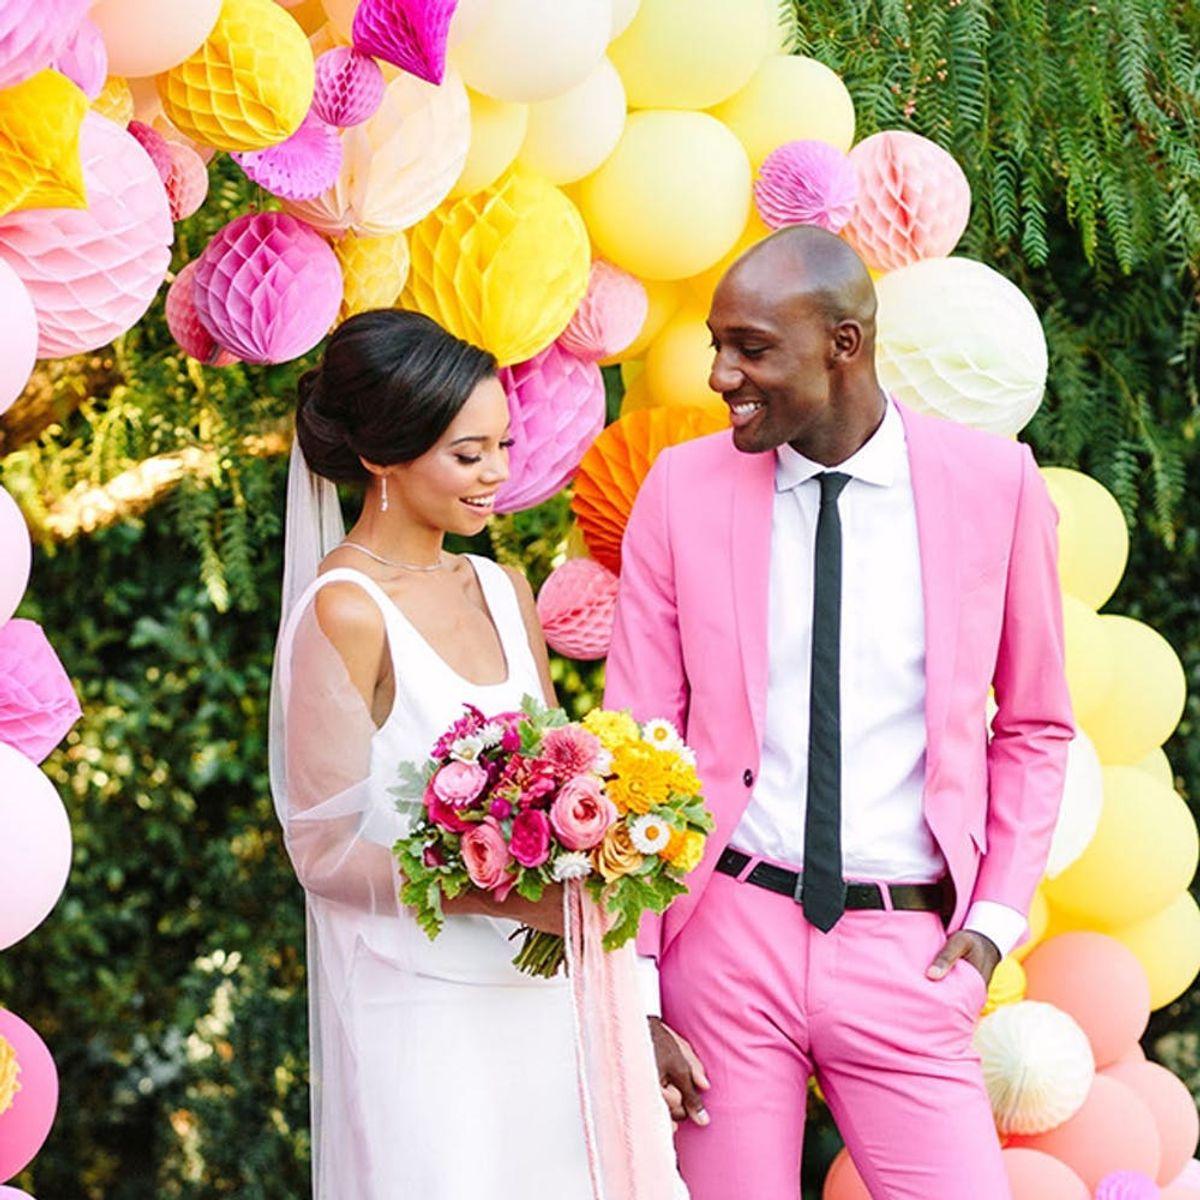 Wedding Balloon Displays Are Our New Decor Crush